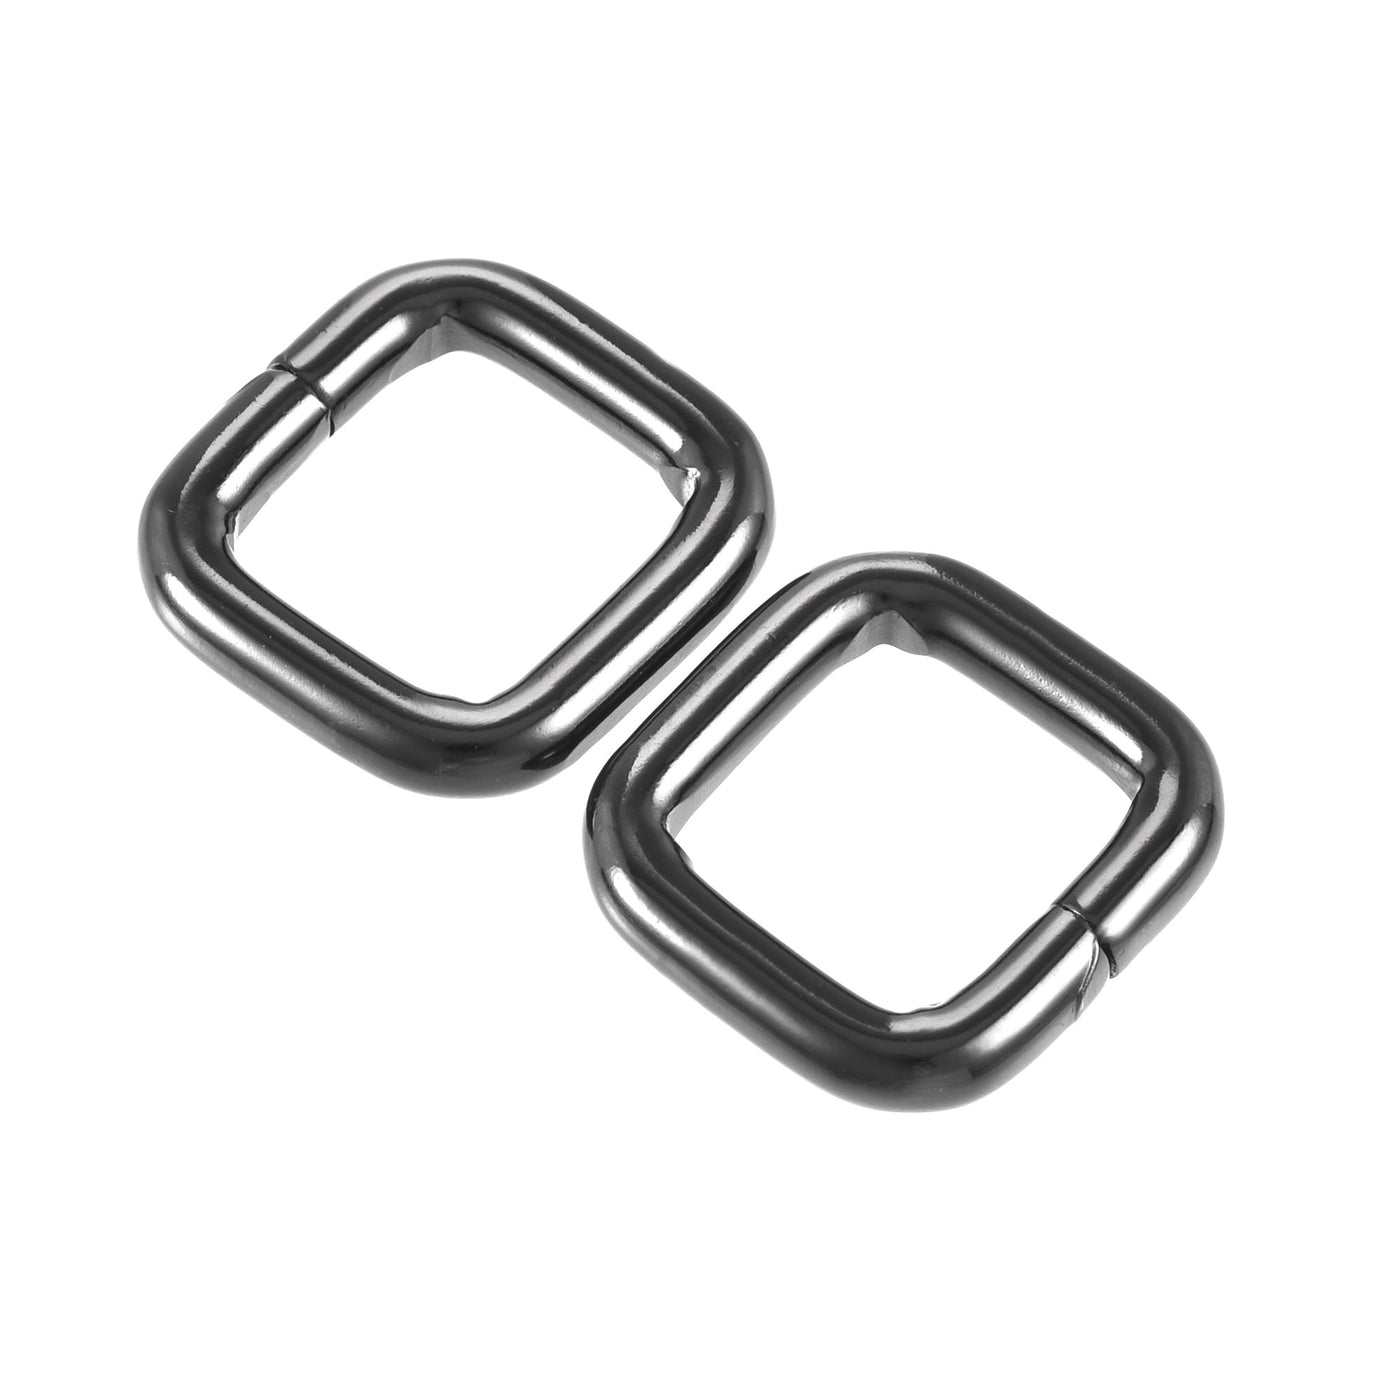 uxcell Uxcell Metal Rectangle Ring Buckles 16x16mm for Bags Belts DIY Black 20pcs